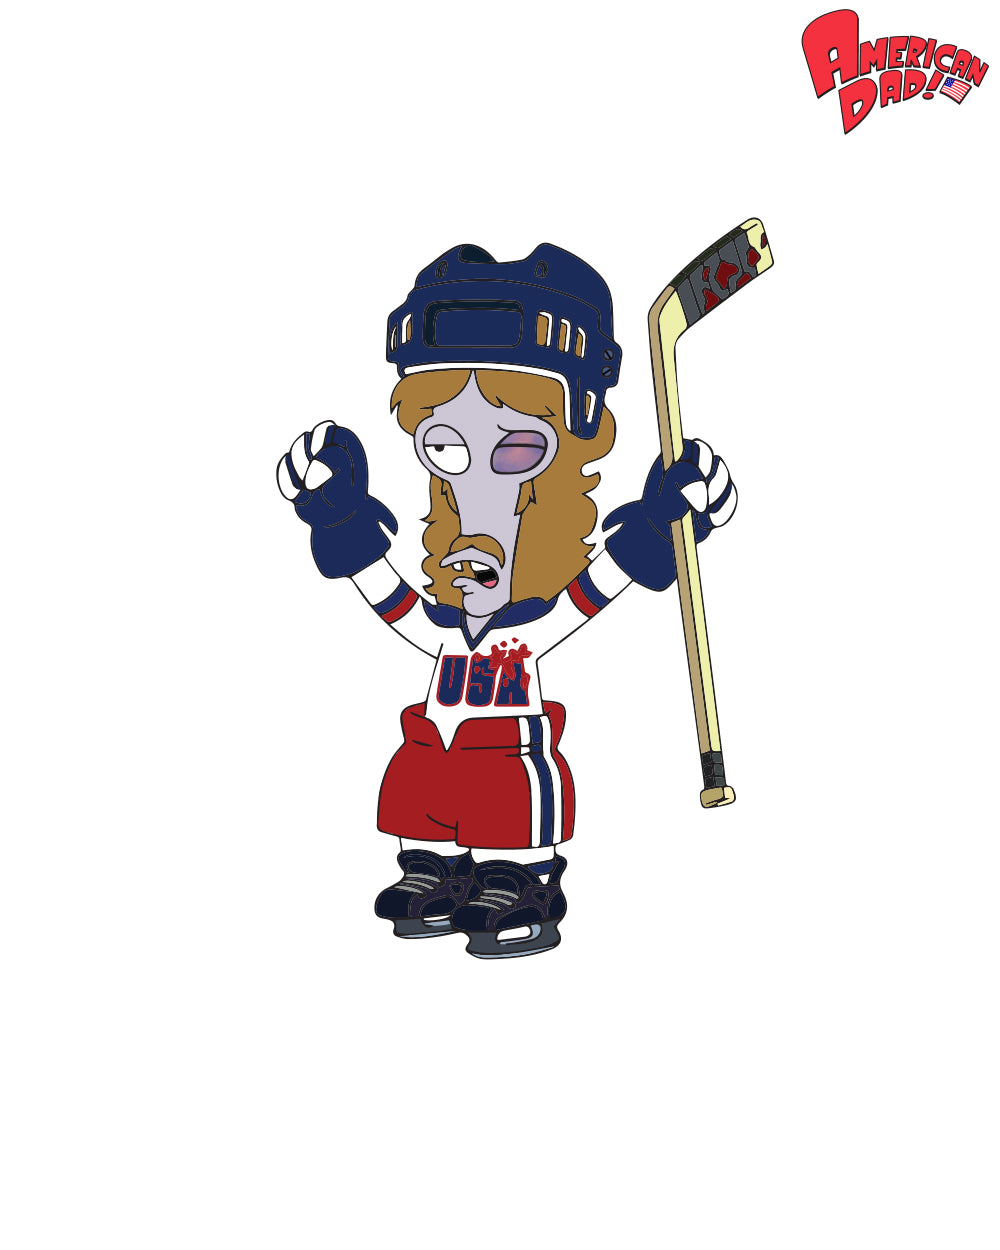 2021 American Dad Chex LeMeneux pin (limited edition of 150) (pre-order, ships 8/15-8/30)